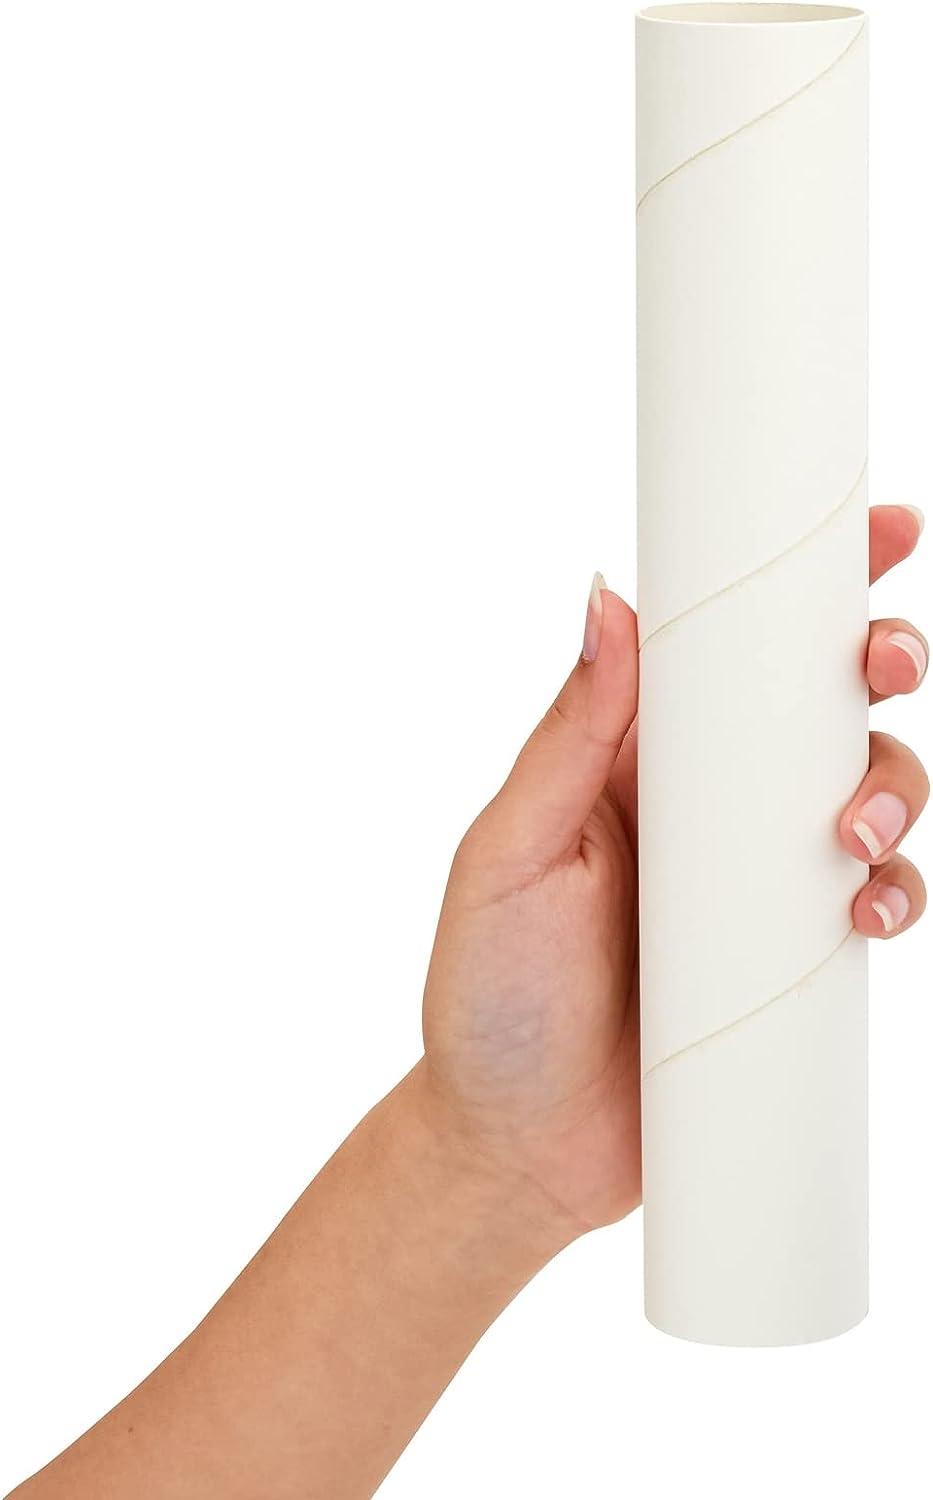 12 Pack White Cardboard Tubes for Crafts, Empty Paper Towels Rolls